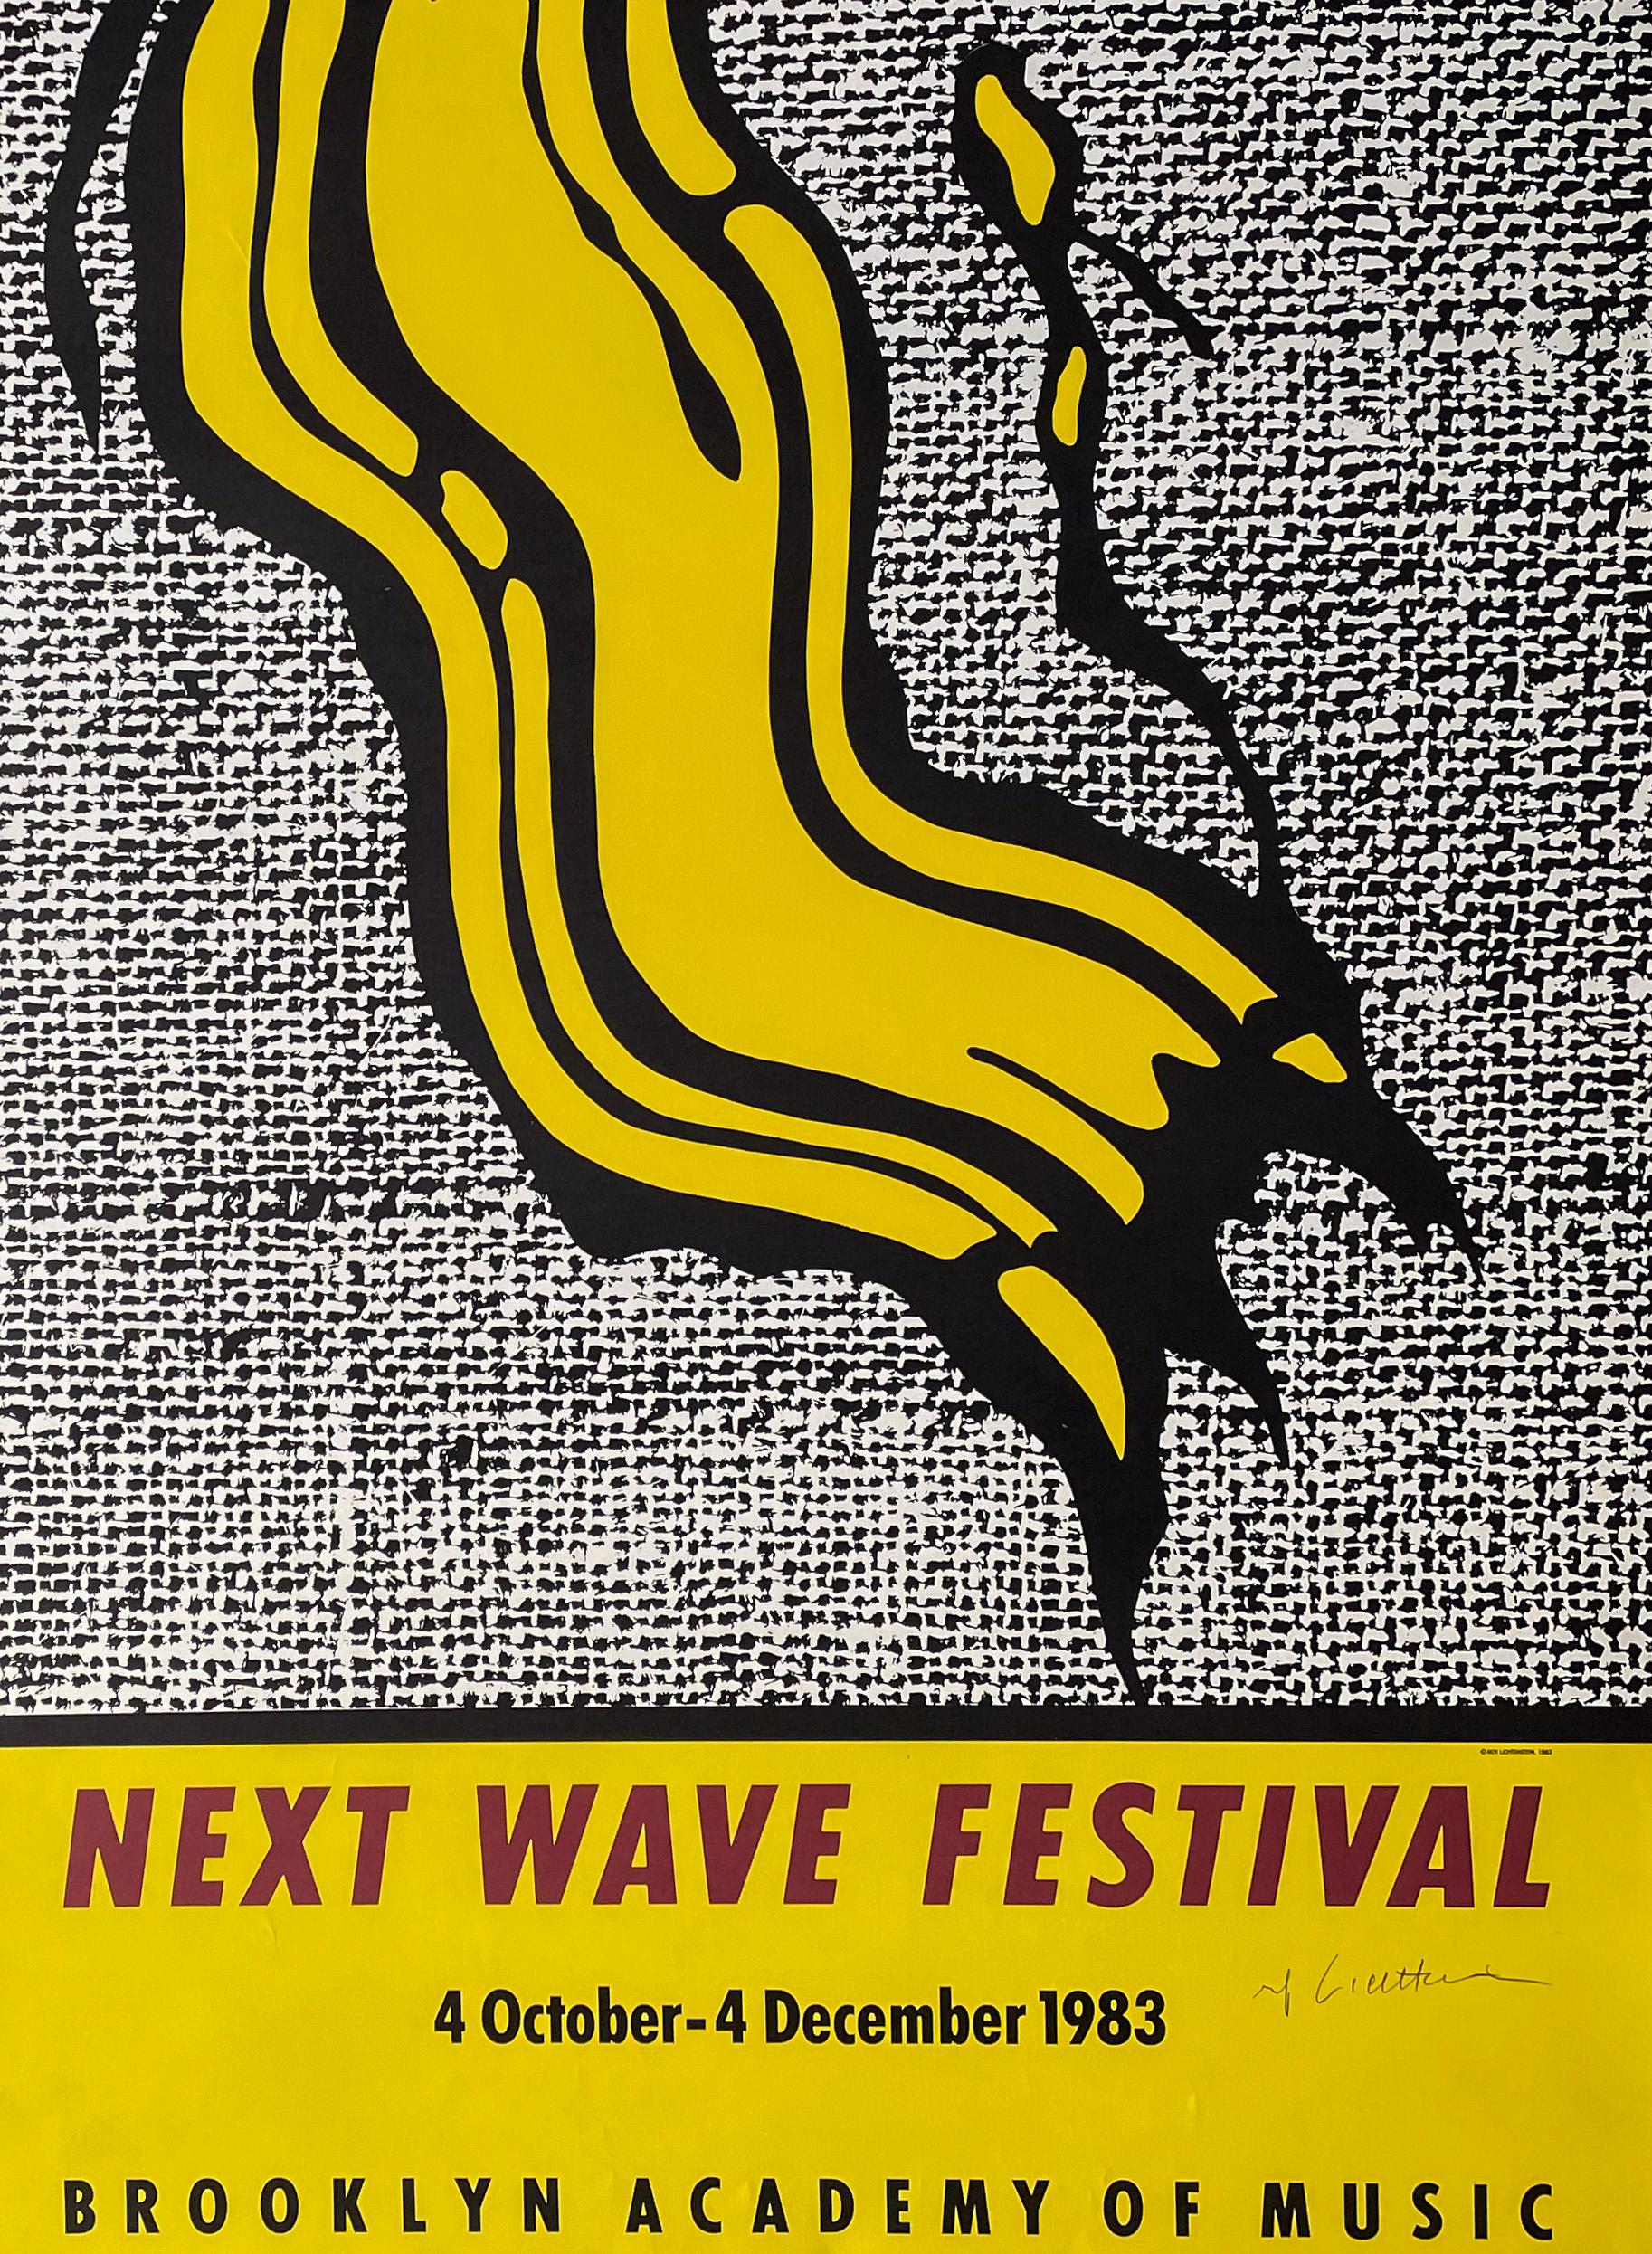 Original poster after an image by Roy Lichtenstein for the inaugural (or first official) Next Wave Festival held at the Brooklyn Academy of Music, 4 October-4 December 1983, published in 1983 by Next Wave Producers Council in cooperation with the